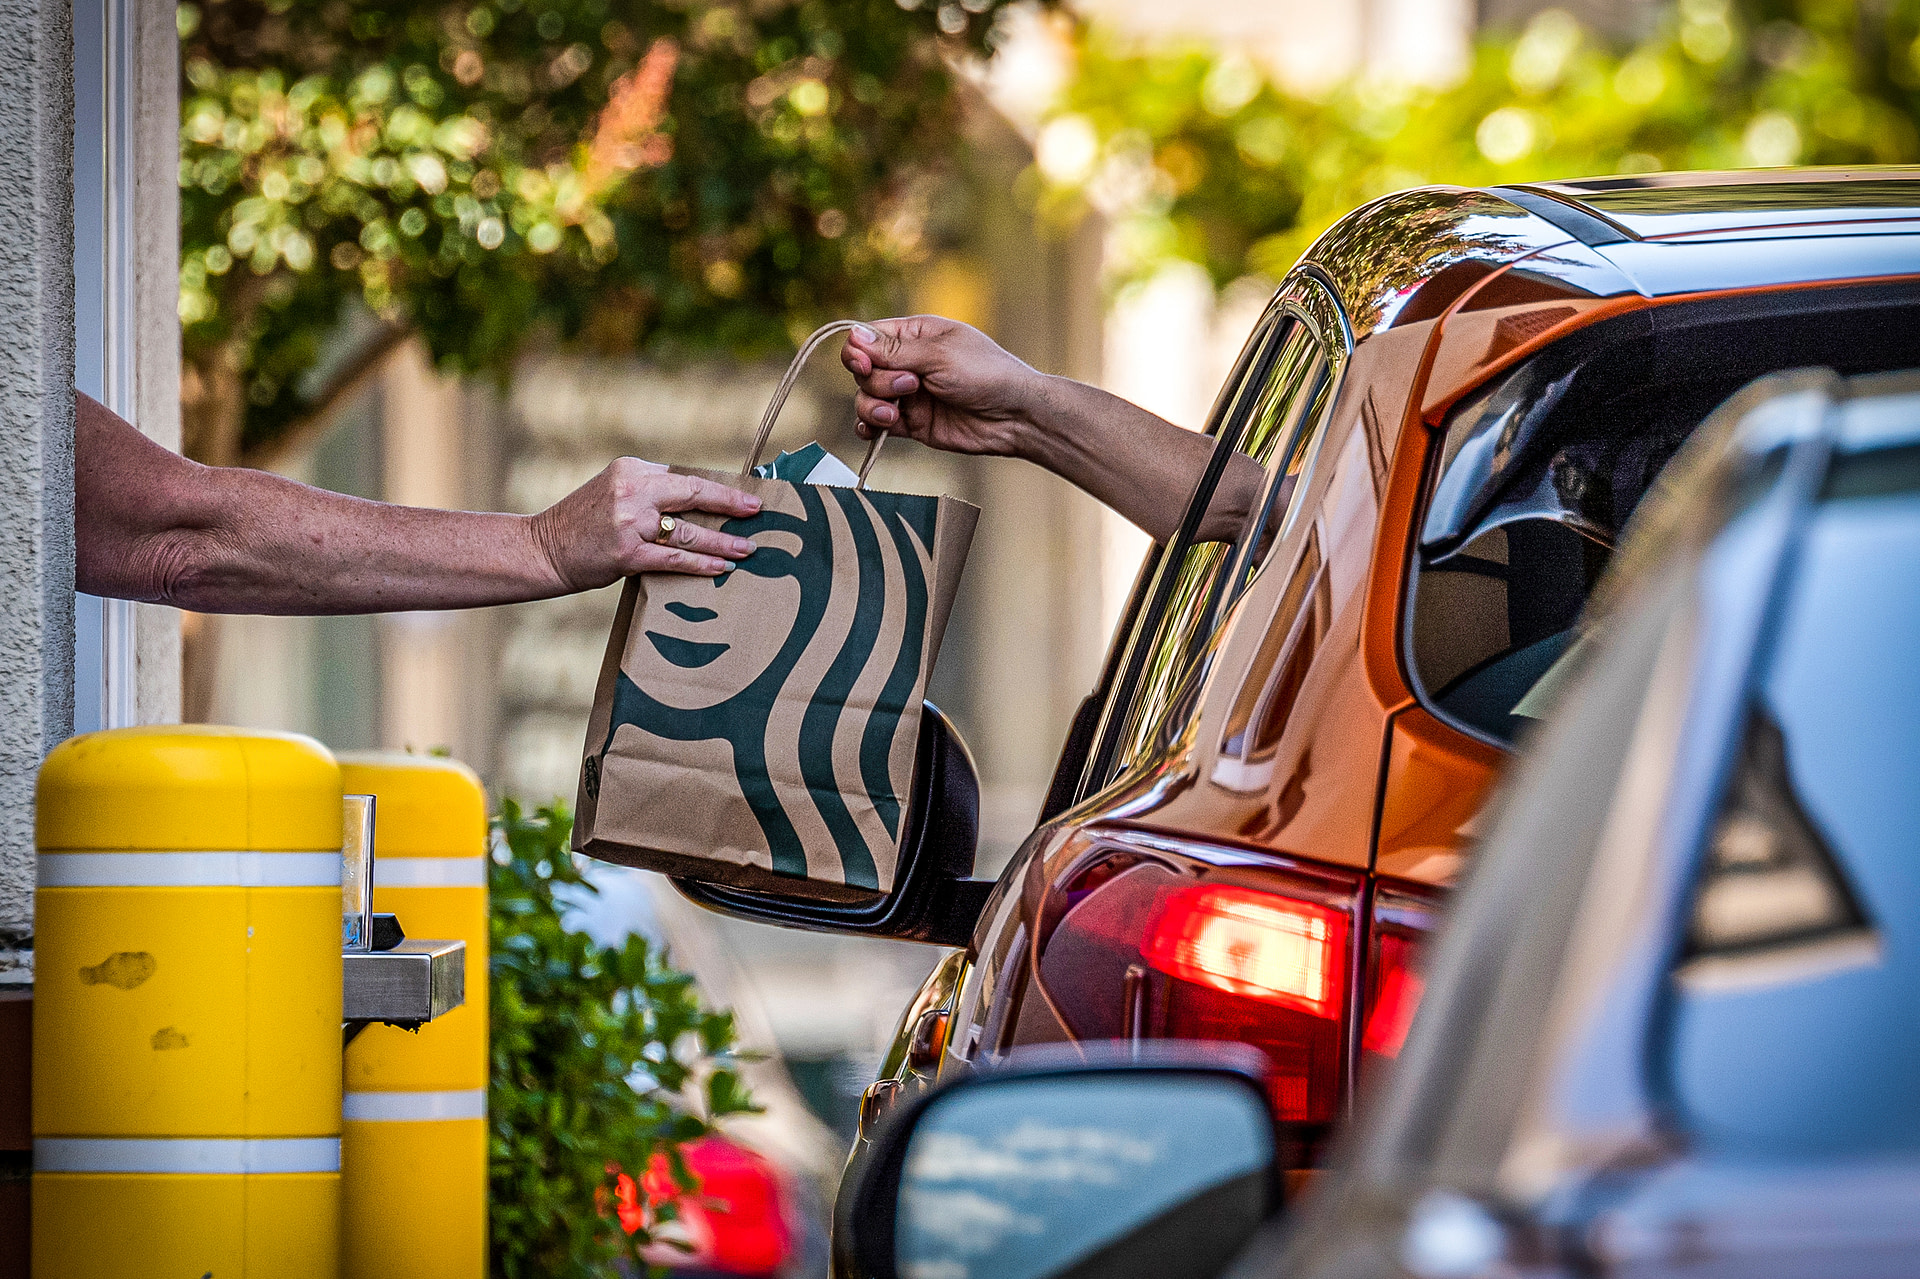 Tips are a con. Starbucks is only the latest company to take advantage.